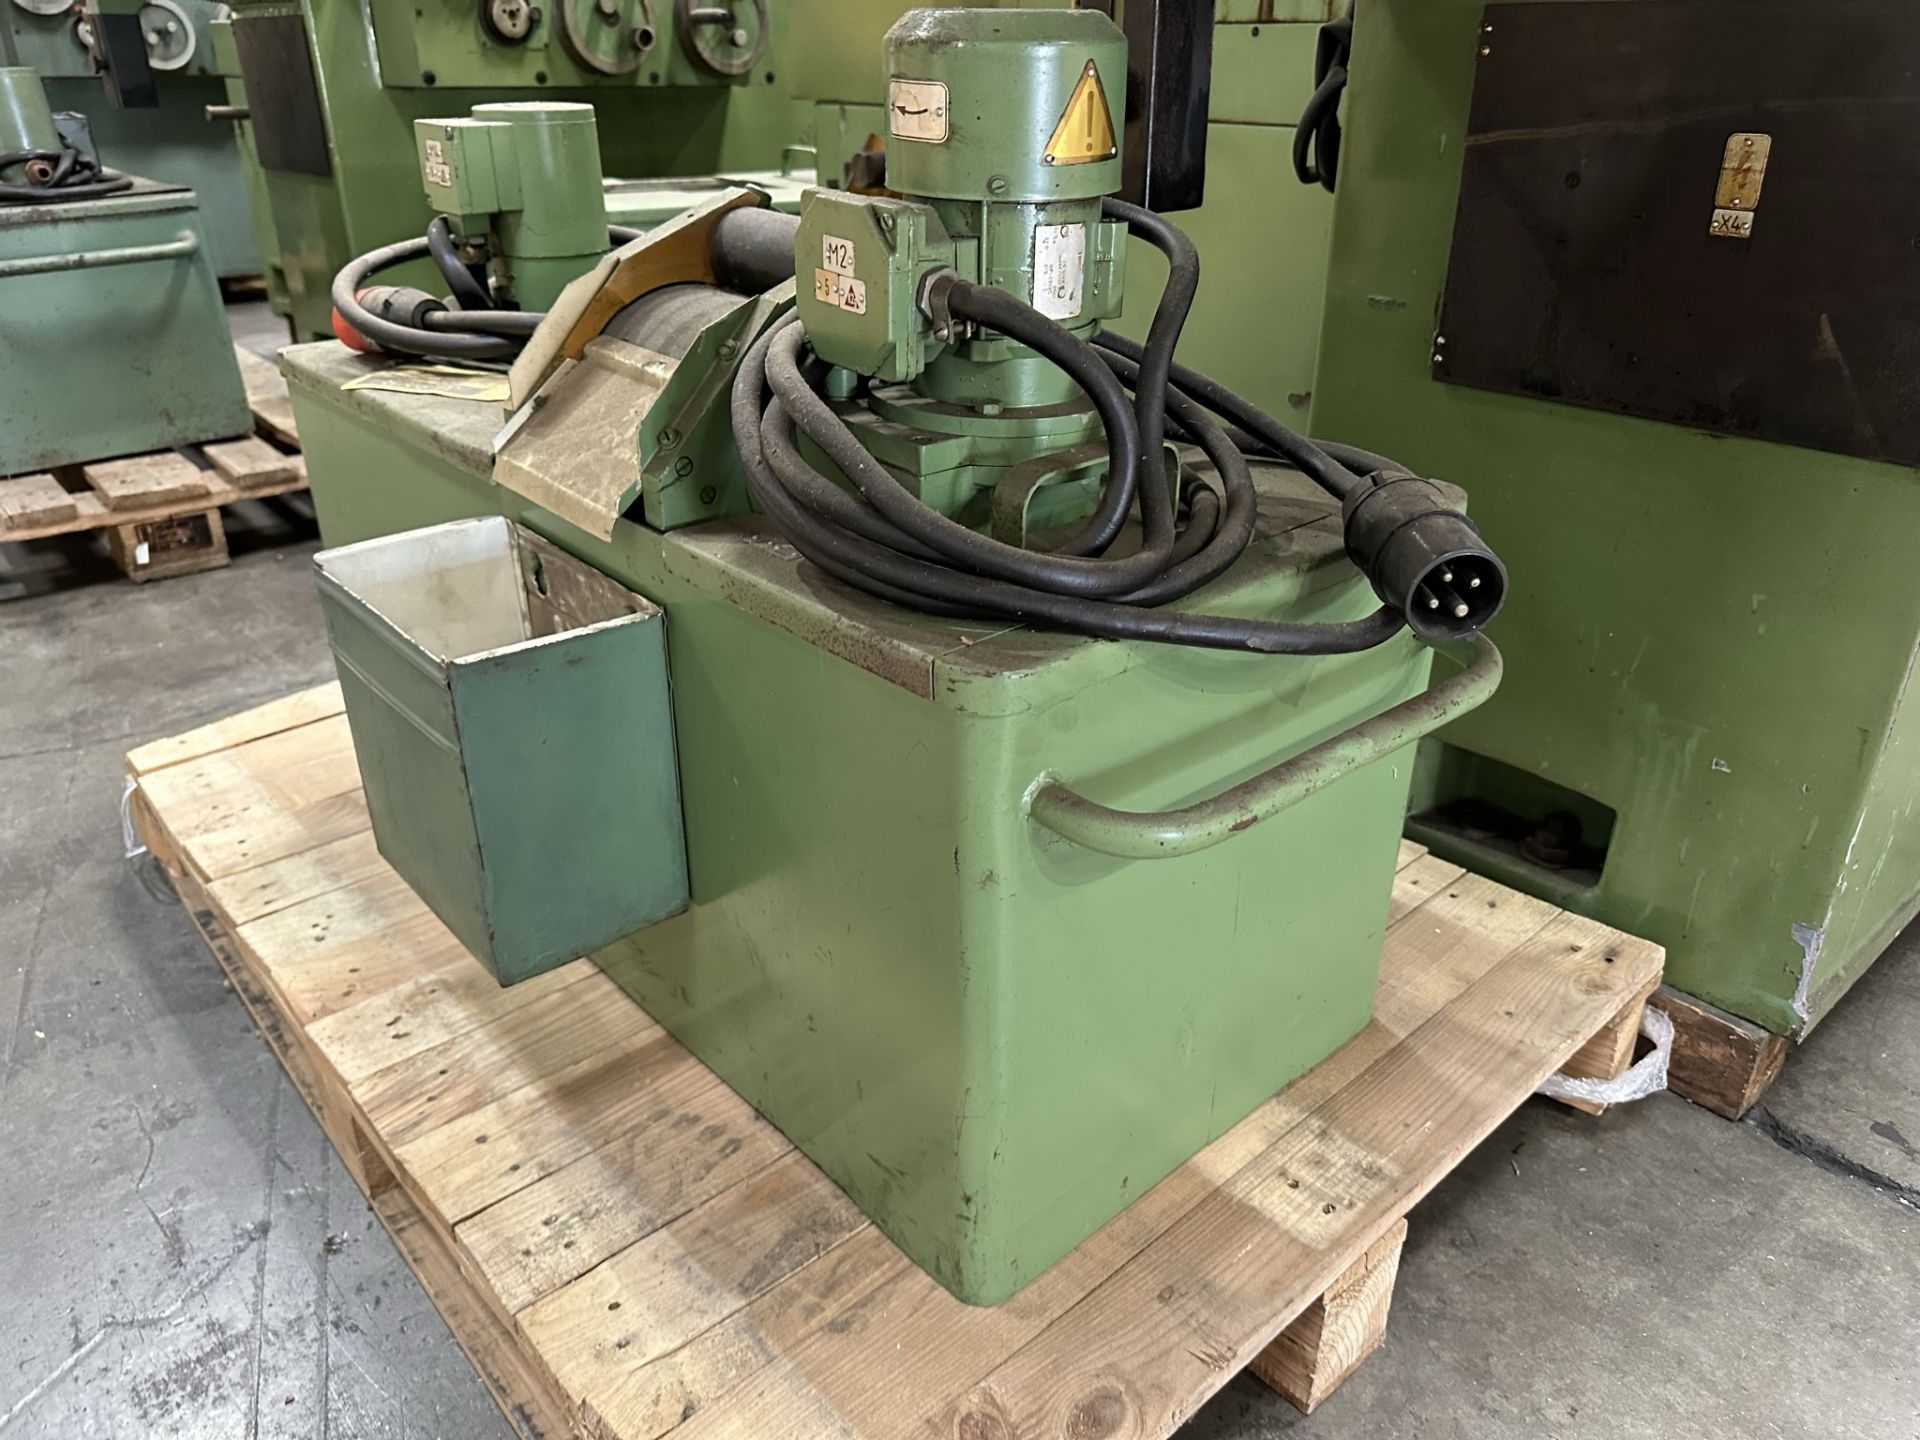 JOTES SURFACE GRINDER, FABRYKA SZLIFIEREK, TYPE SPG 40 X 80 E, 16" X 32" MAGNETIC CHUCK, S/N 51/ - Image 6 of 15